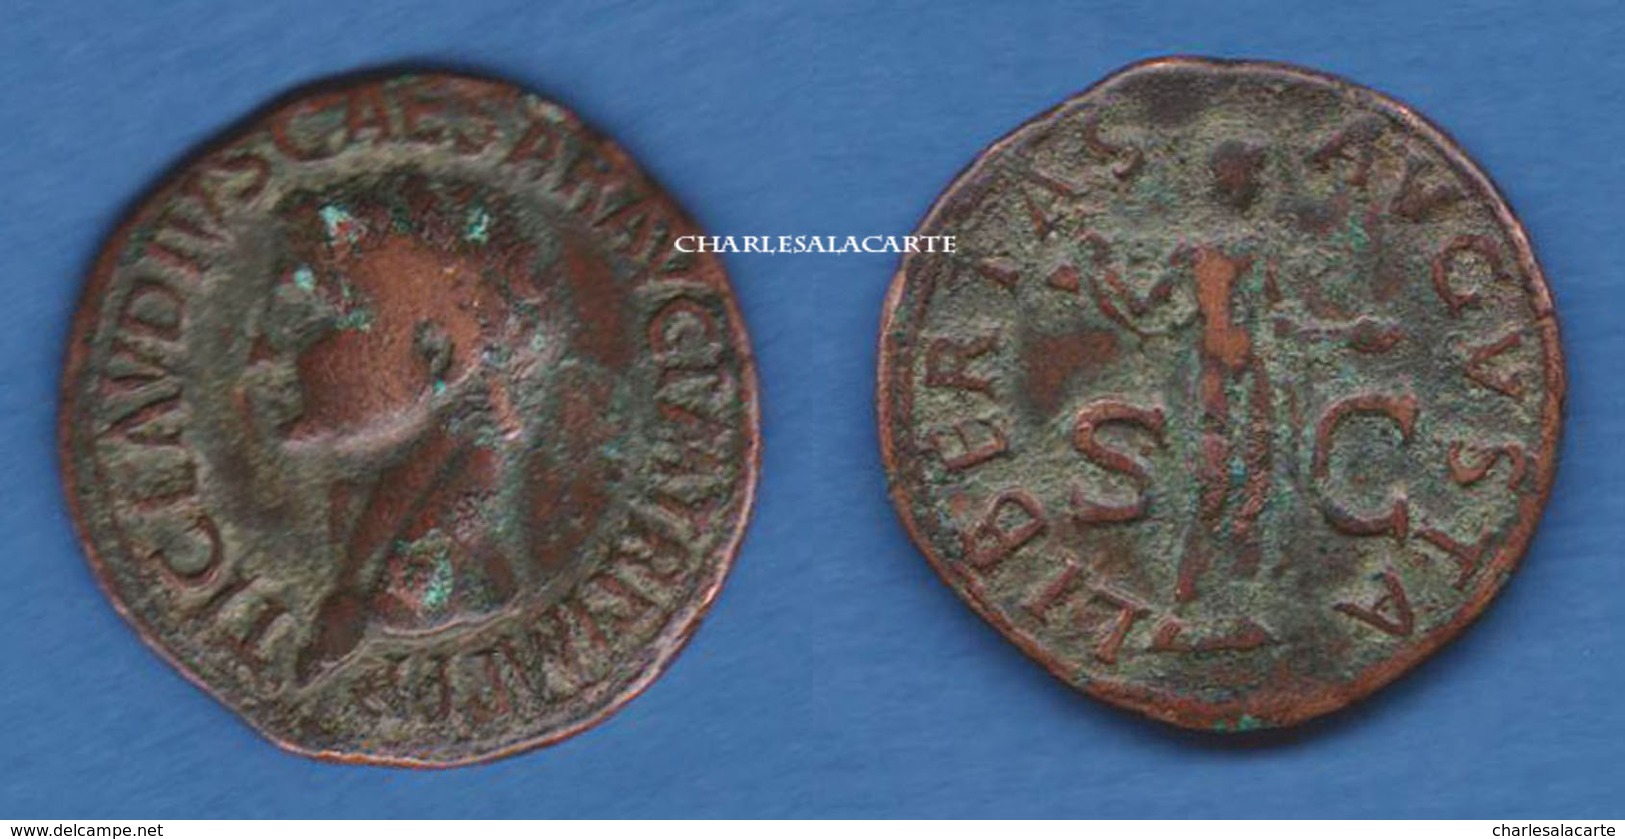 CLAUDIUS CLAUDE TYPE AS  COPPER  DATE 50-54  ROME GOOD/VERY GOOD CONDITION TB+ PLEASE SEE SCAN - Les Julio-Claudiens (-27 à 69)